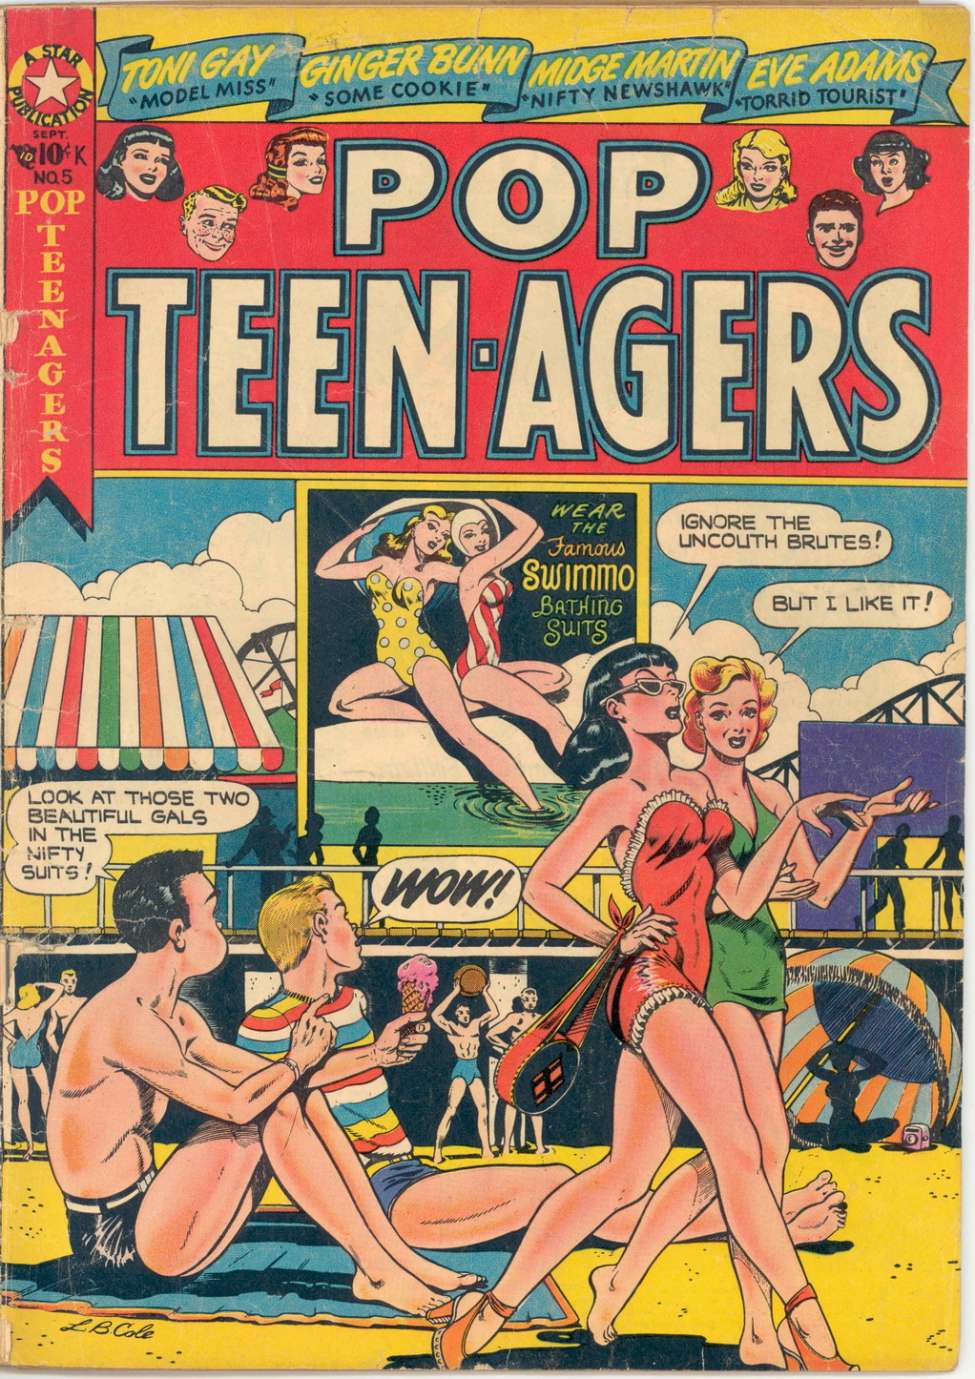 Book Cover For Popular Teen-Agers 5